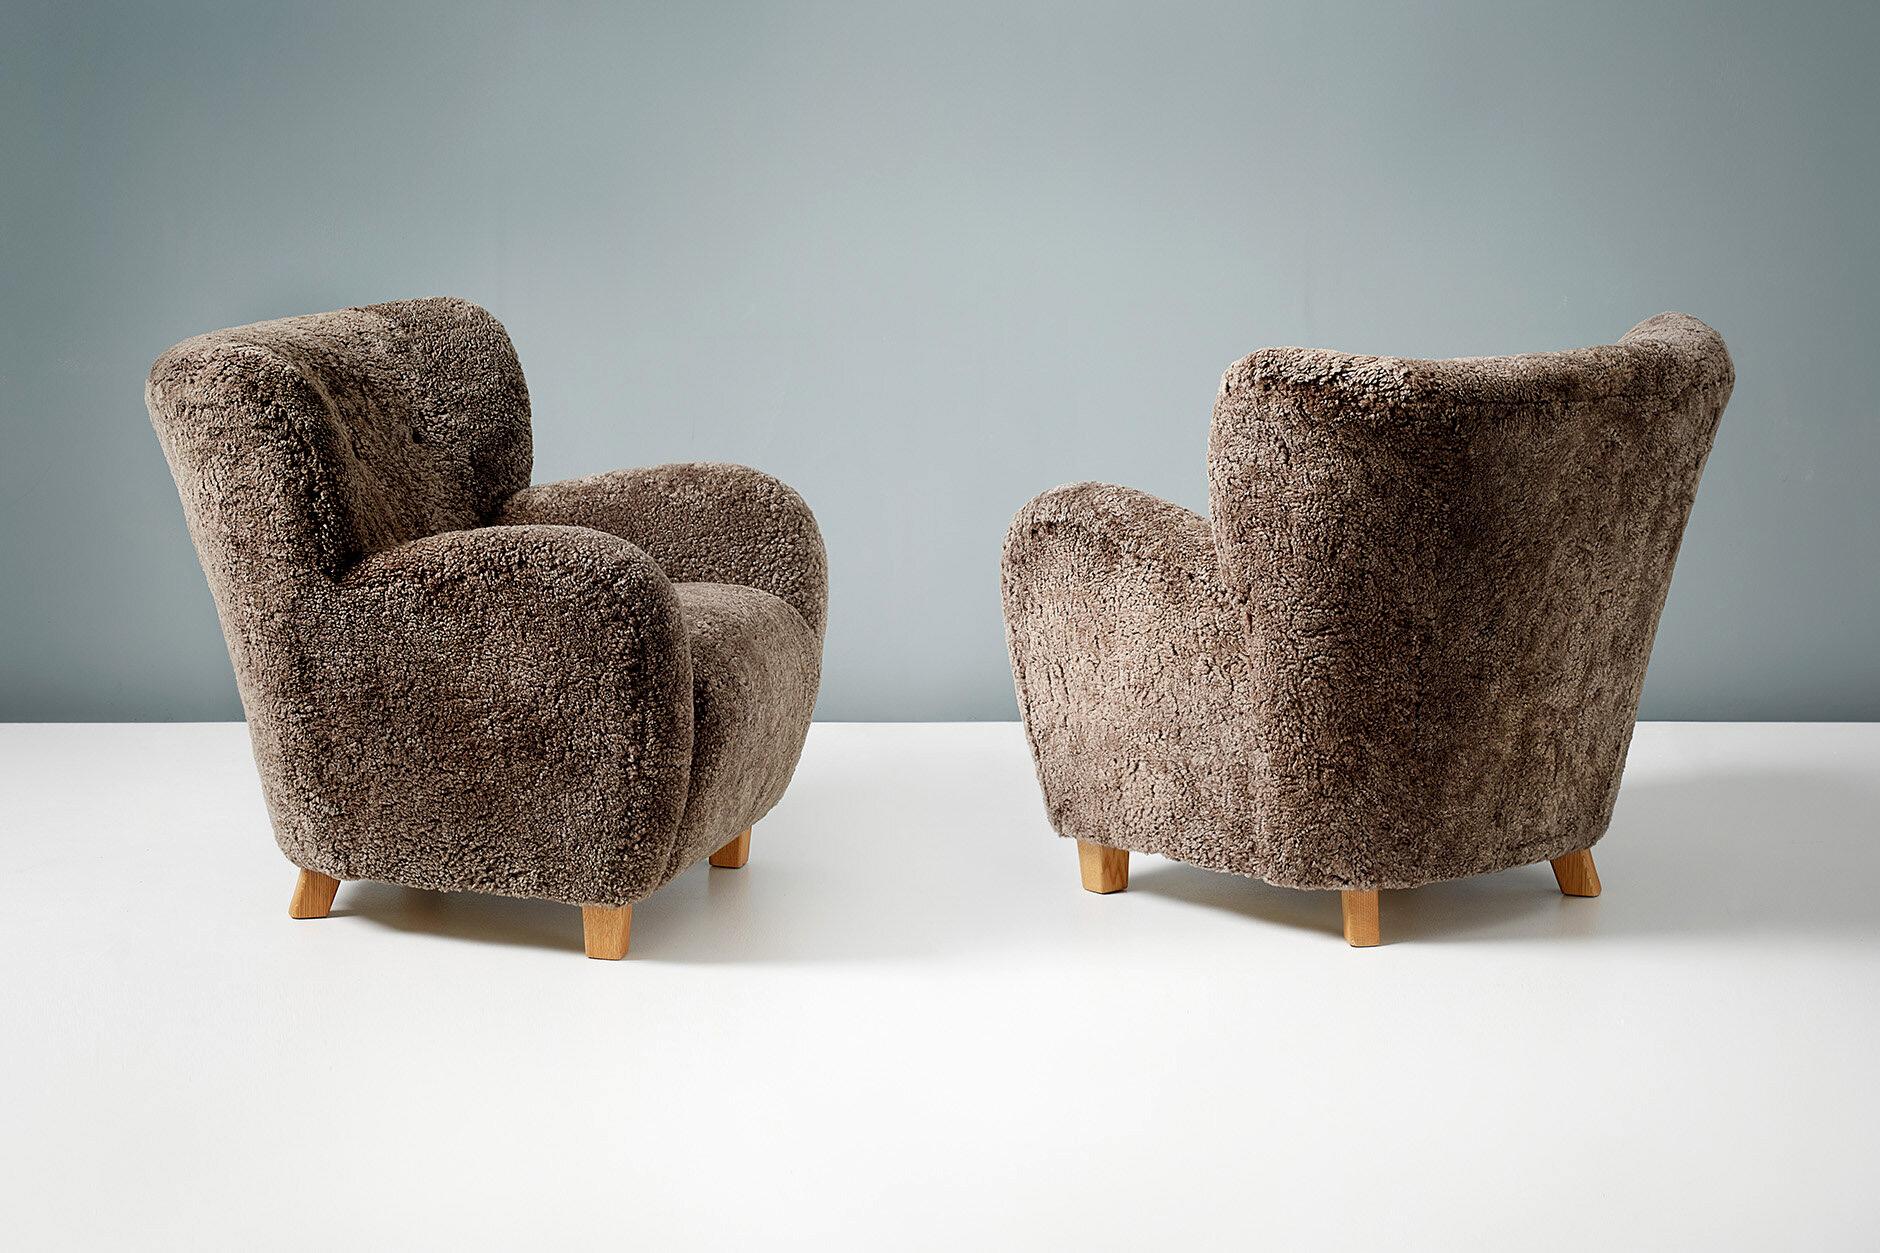 Pair of Custom Made Brown Sheepskin Lounge Chairs In New Condition For Sale In London, England